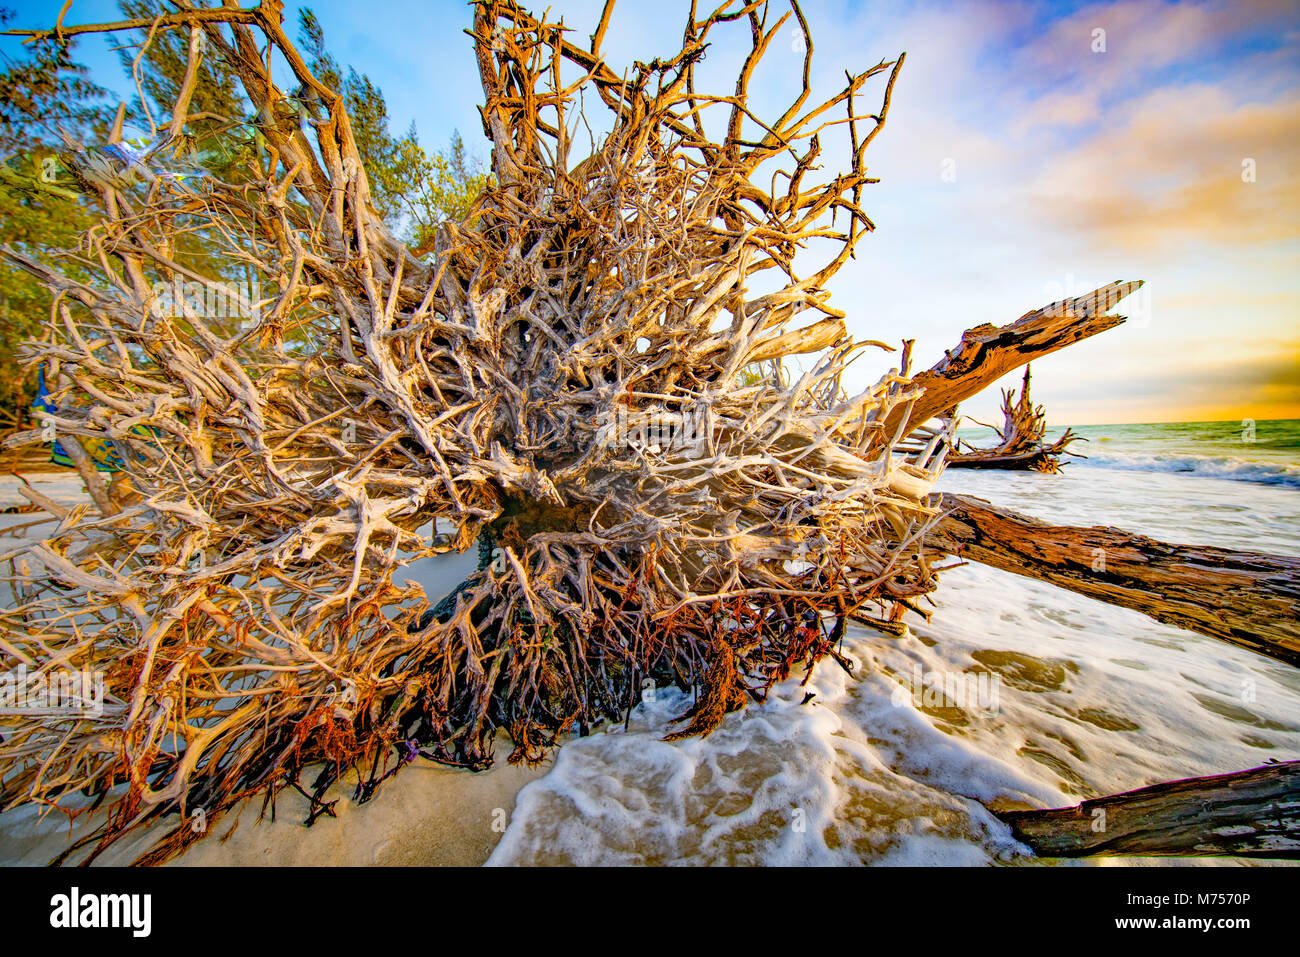 The Drowned Forest, Longboat Key, Florida Guulf of Mexico Stock Photo